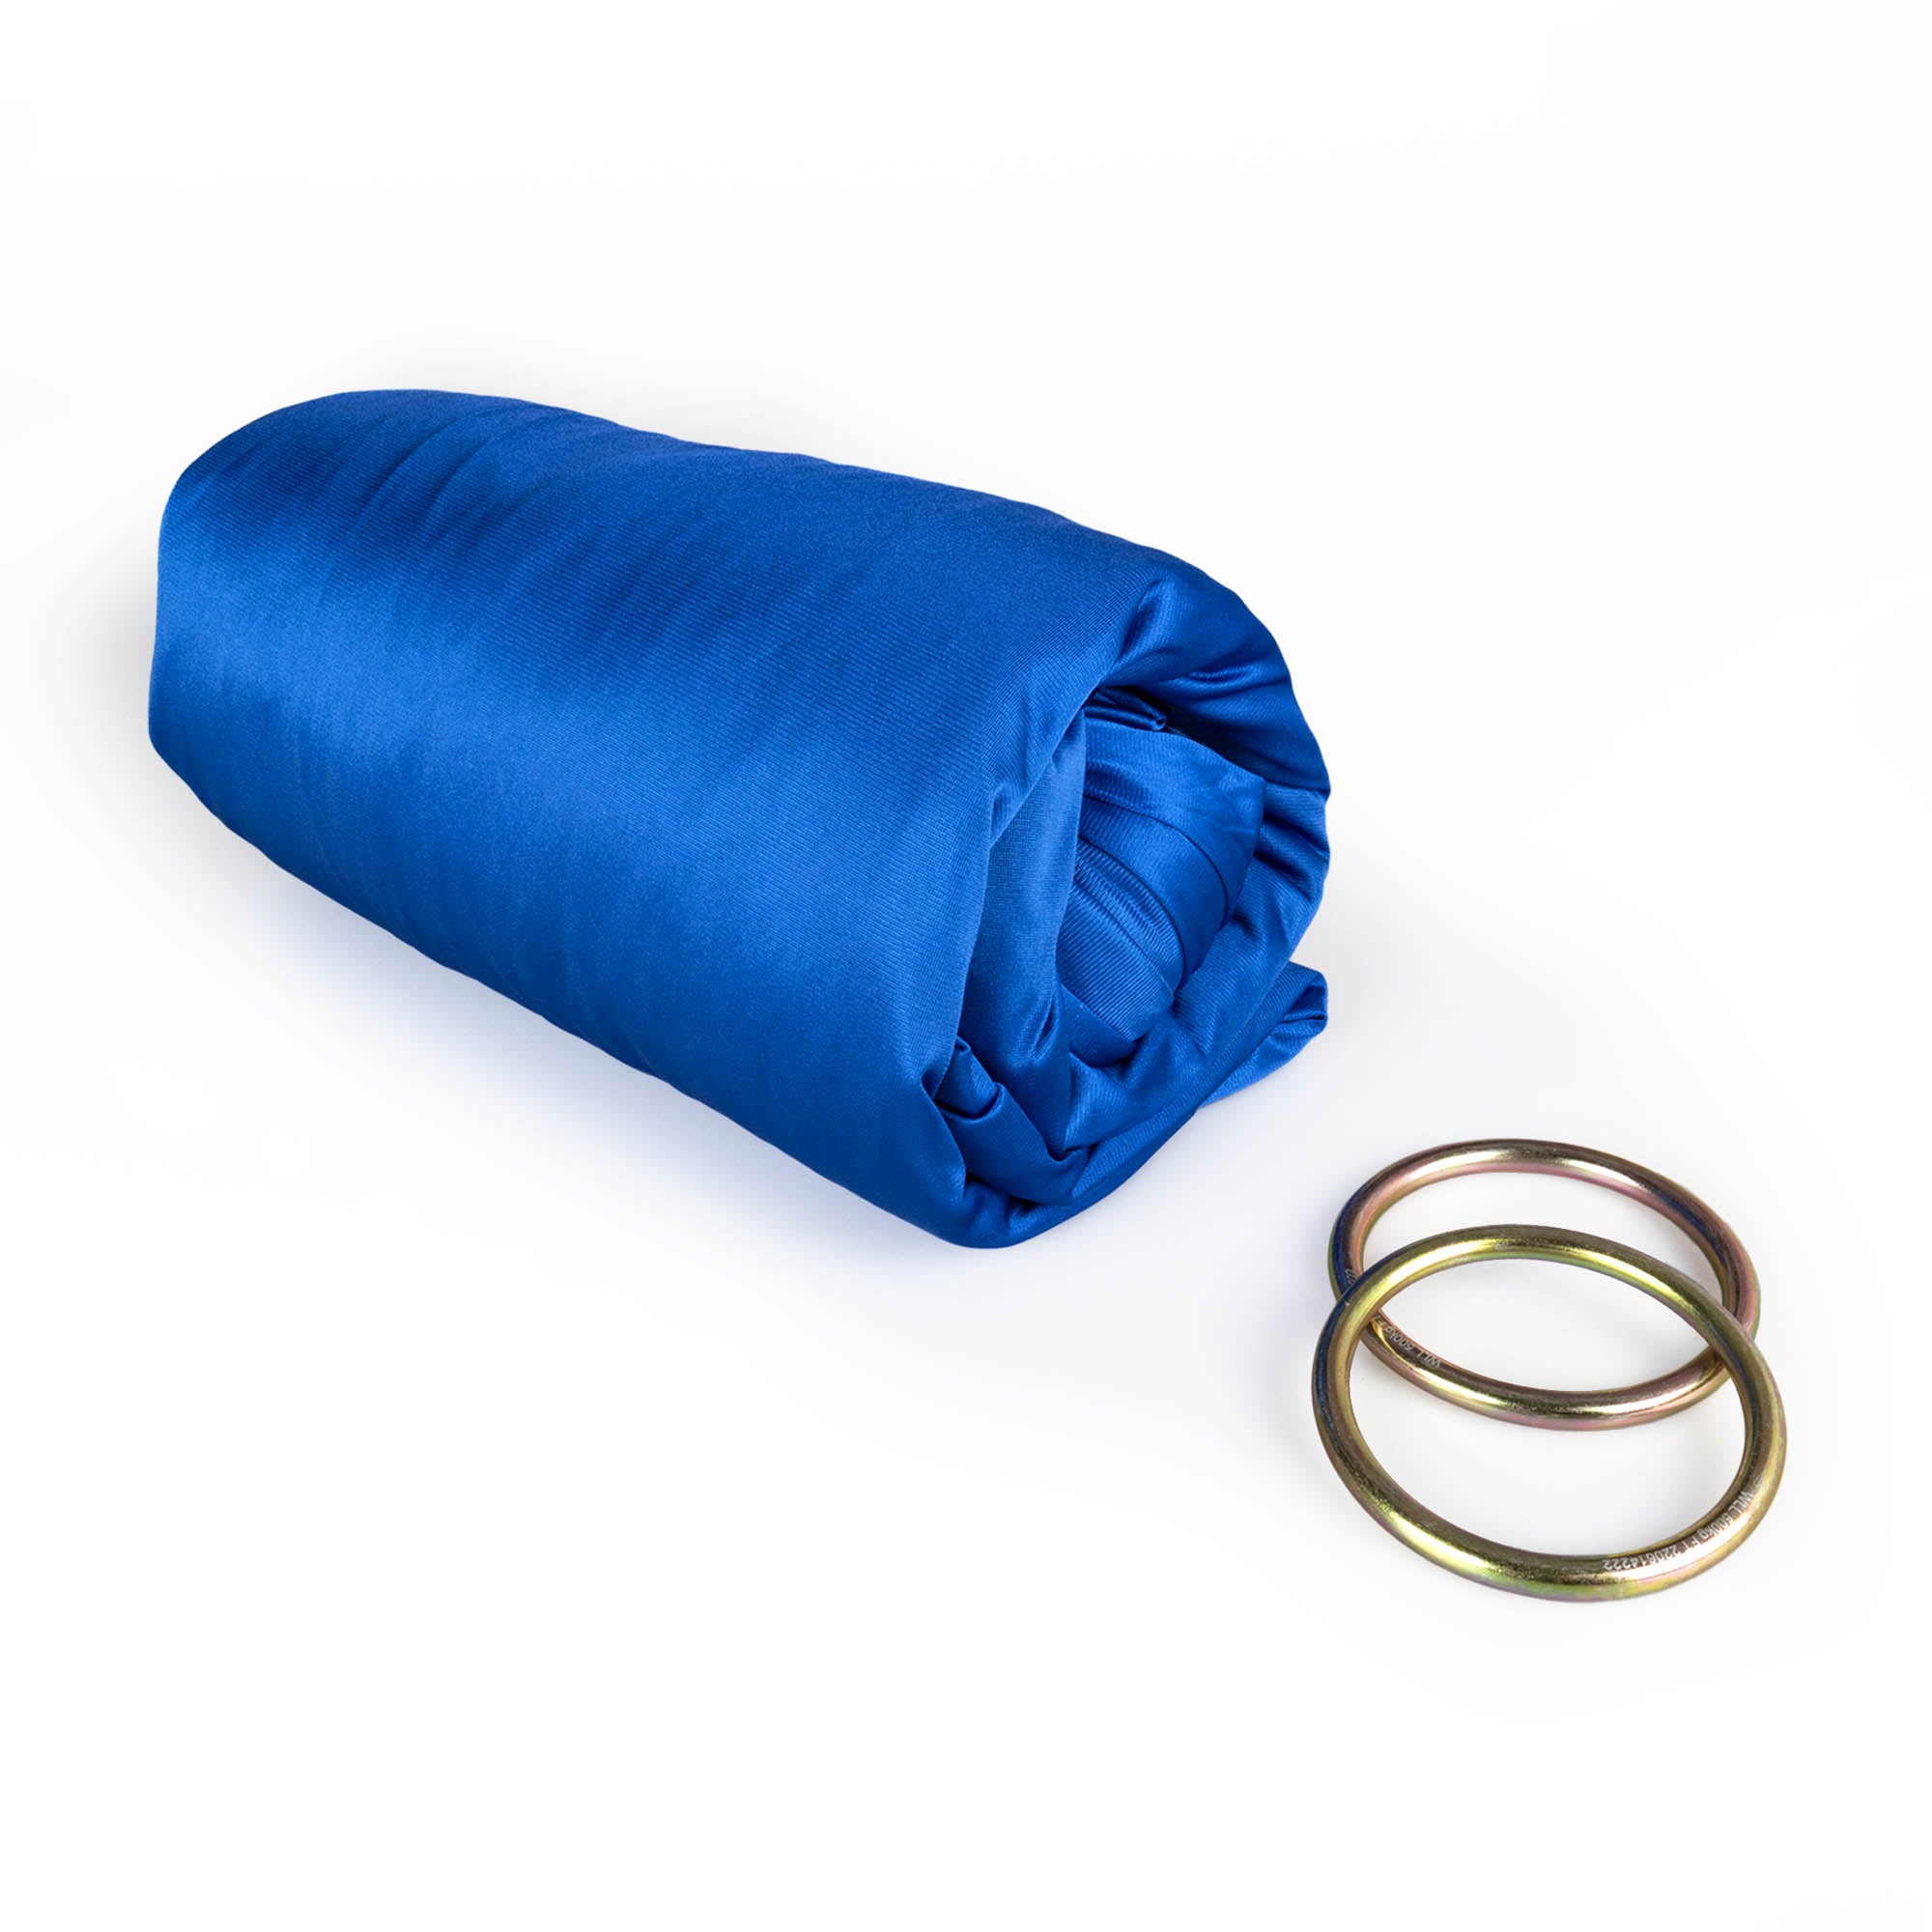 Royal blue yoga hammock rolled up with ring dettached